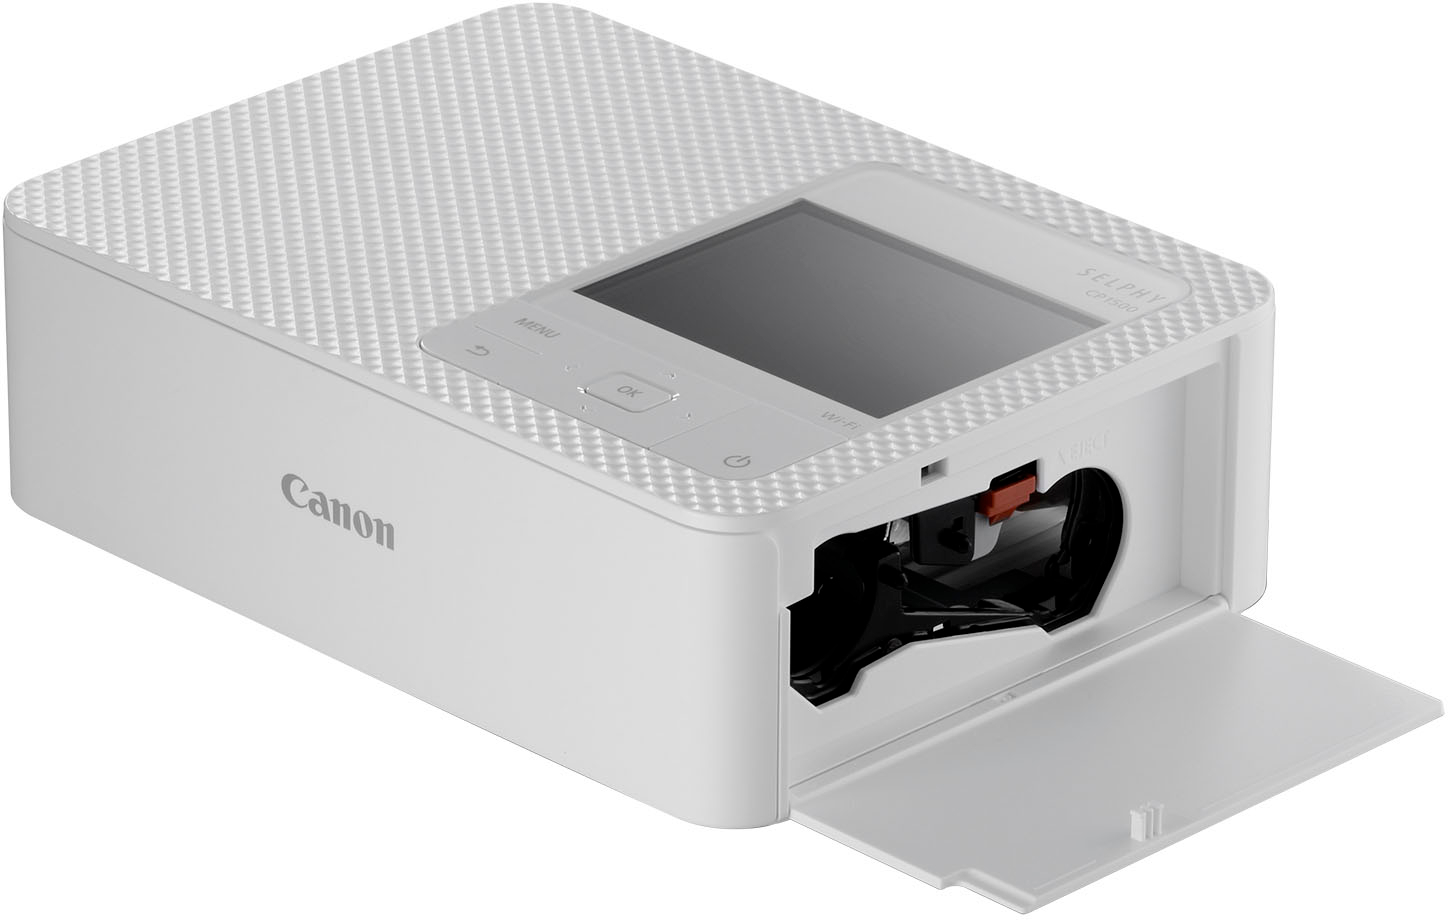 Canon SELPHY CP1500 Wireless Compact Photo Printer White 5540C002 - Best Buy